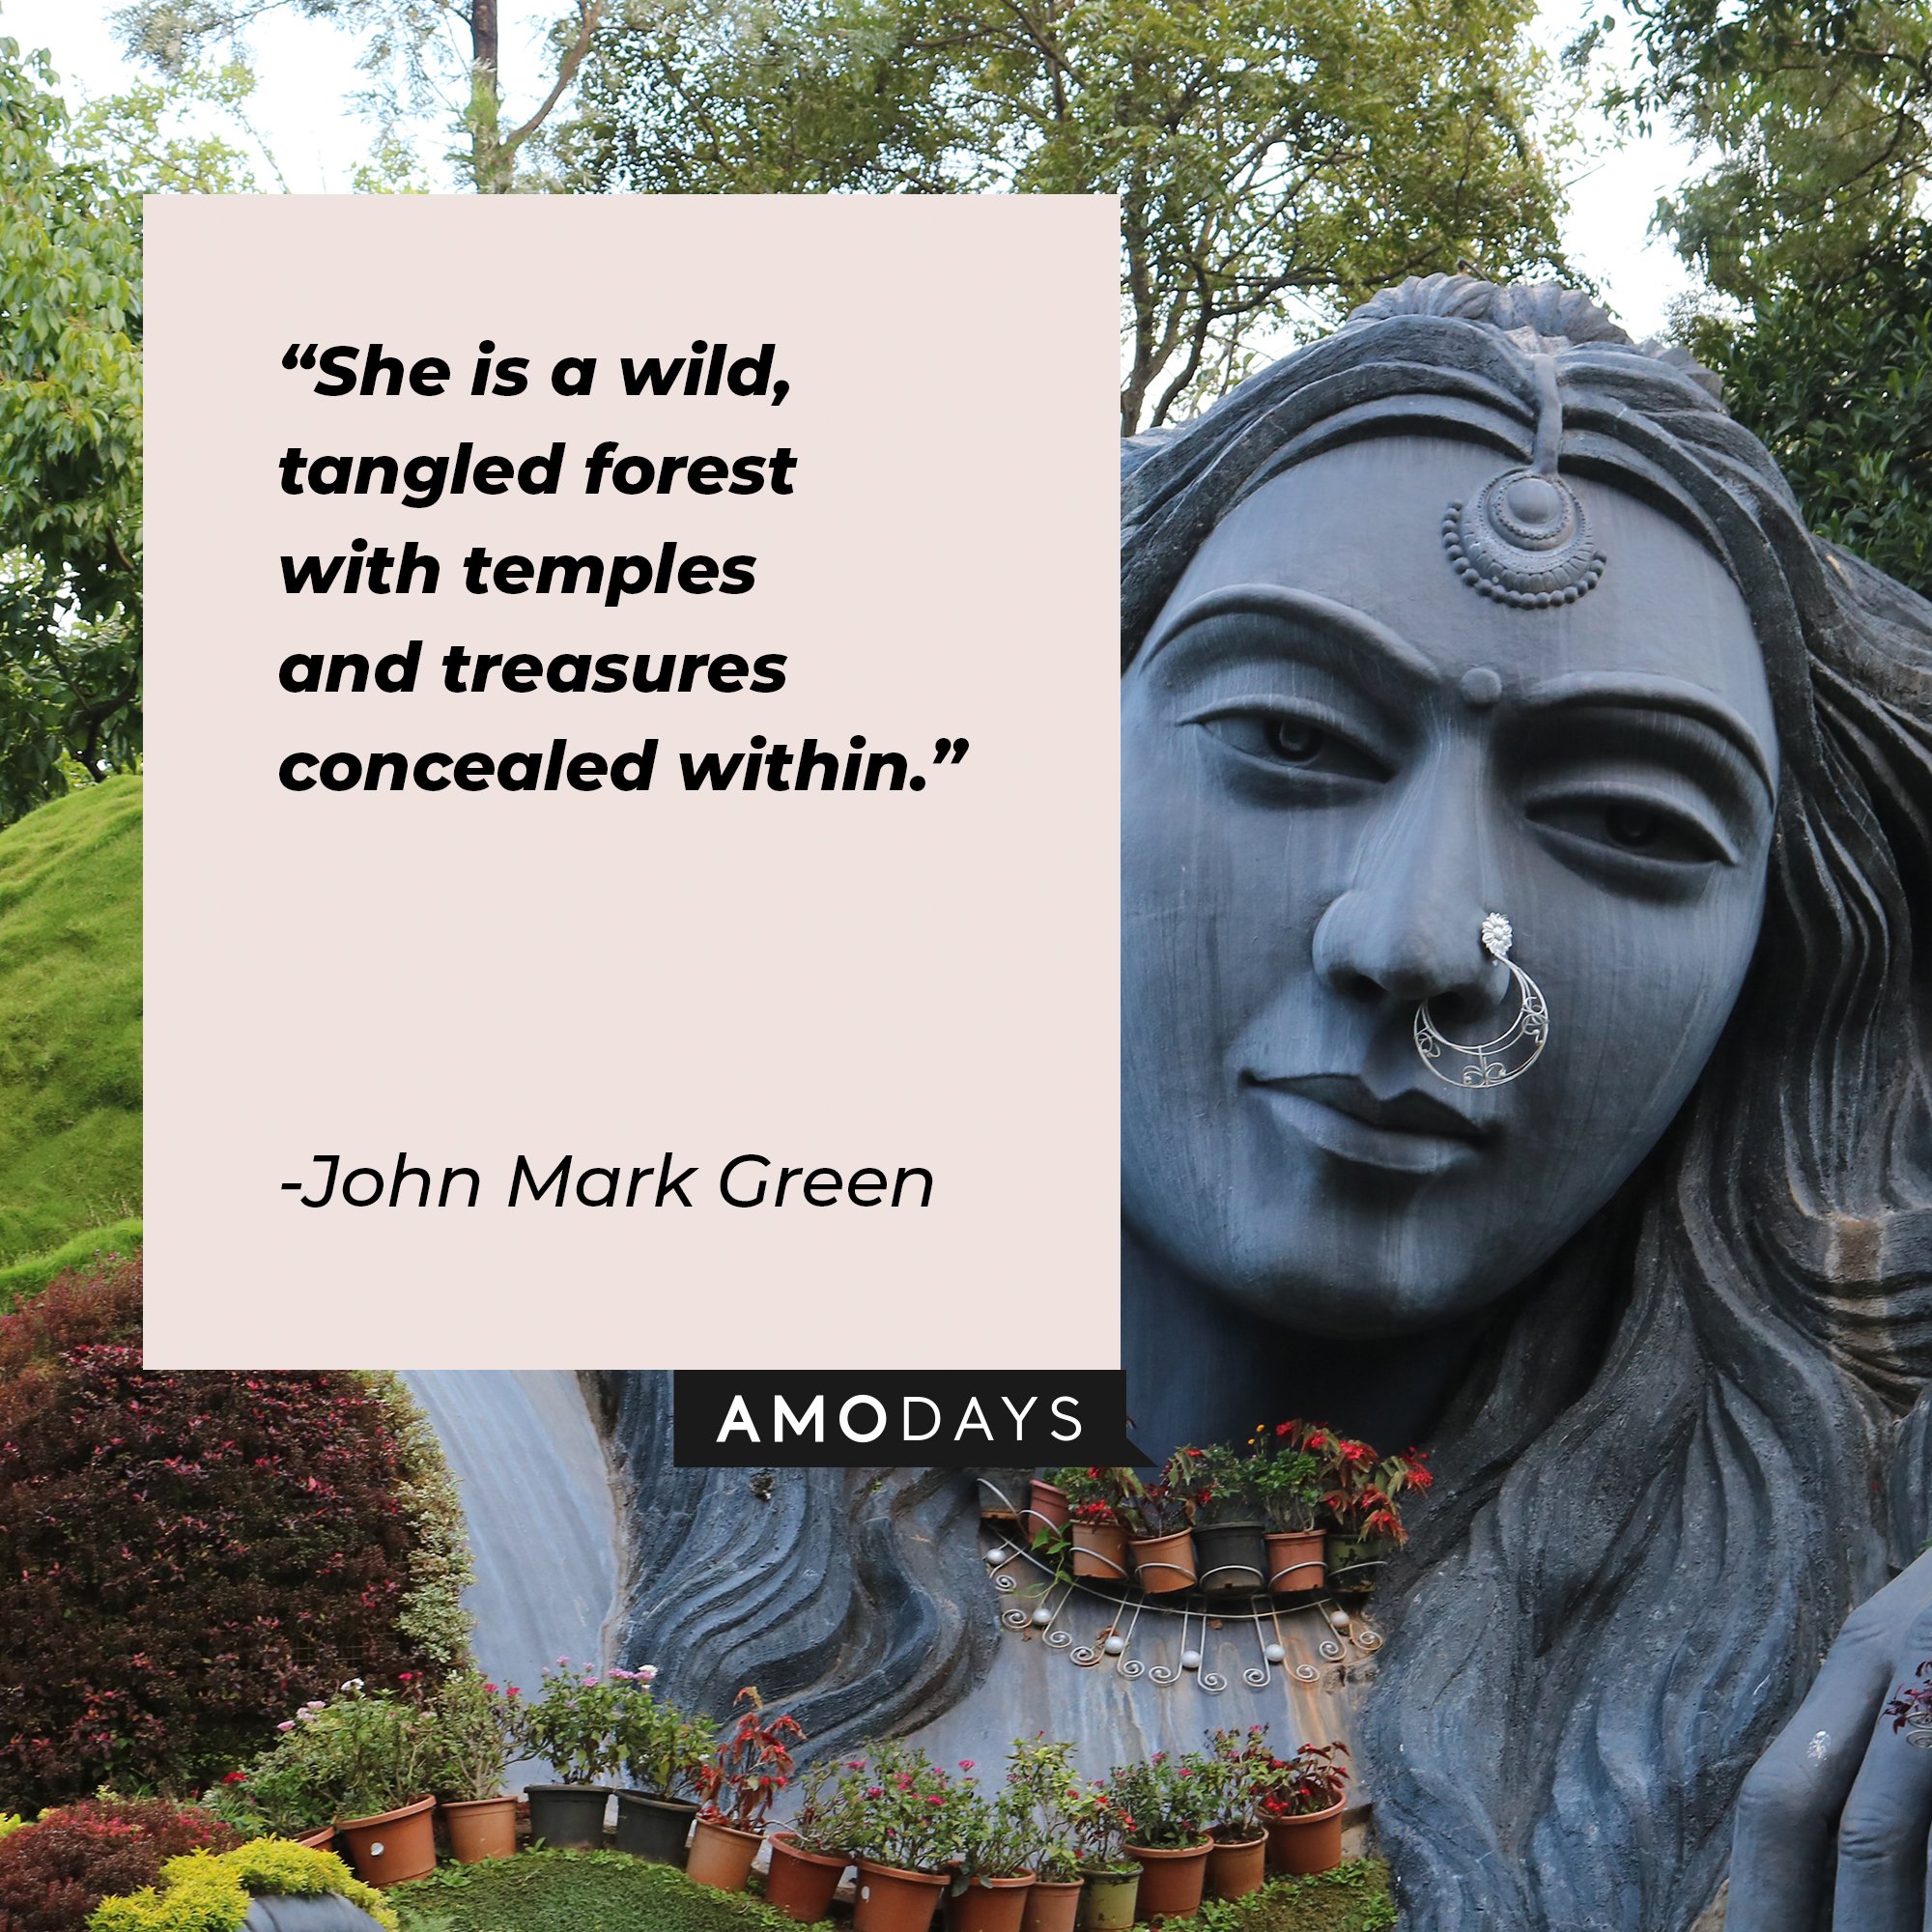 John Mark Green’s quote: "She is a wild, tangled forest with temples and treasures concealed within.” | Image: AmoDays